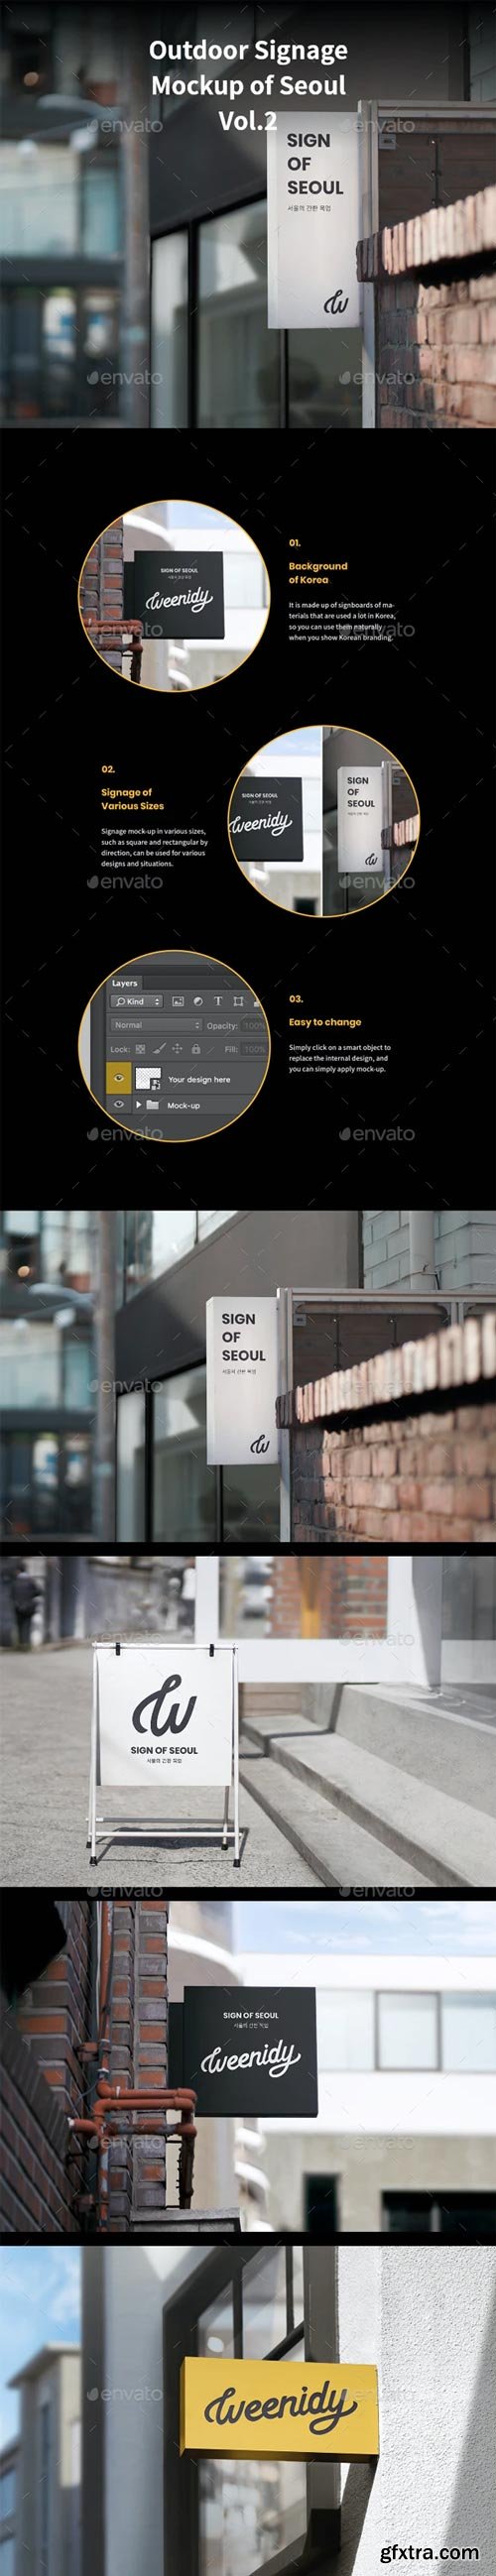 GraphicRiver - Outdoor Signage Mockup of Seoul Vol.2 - 29502866